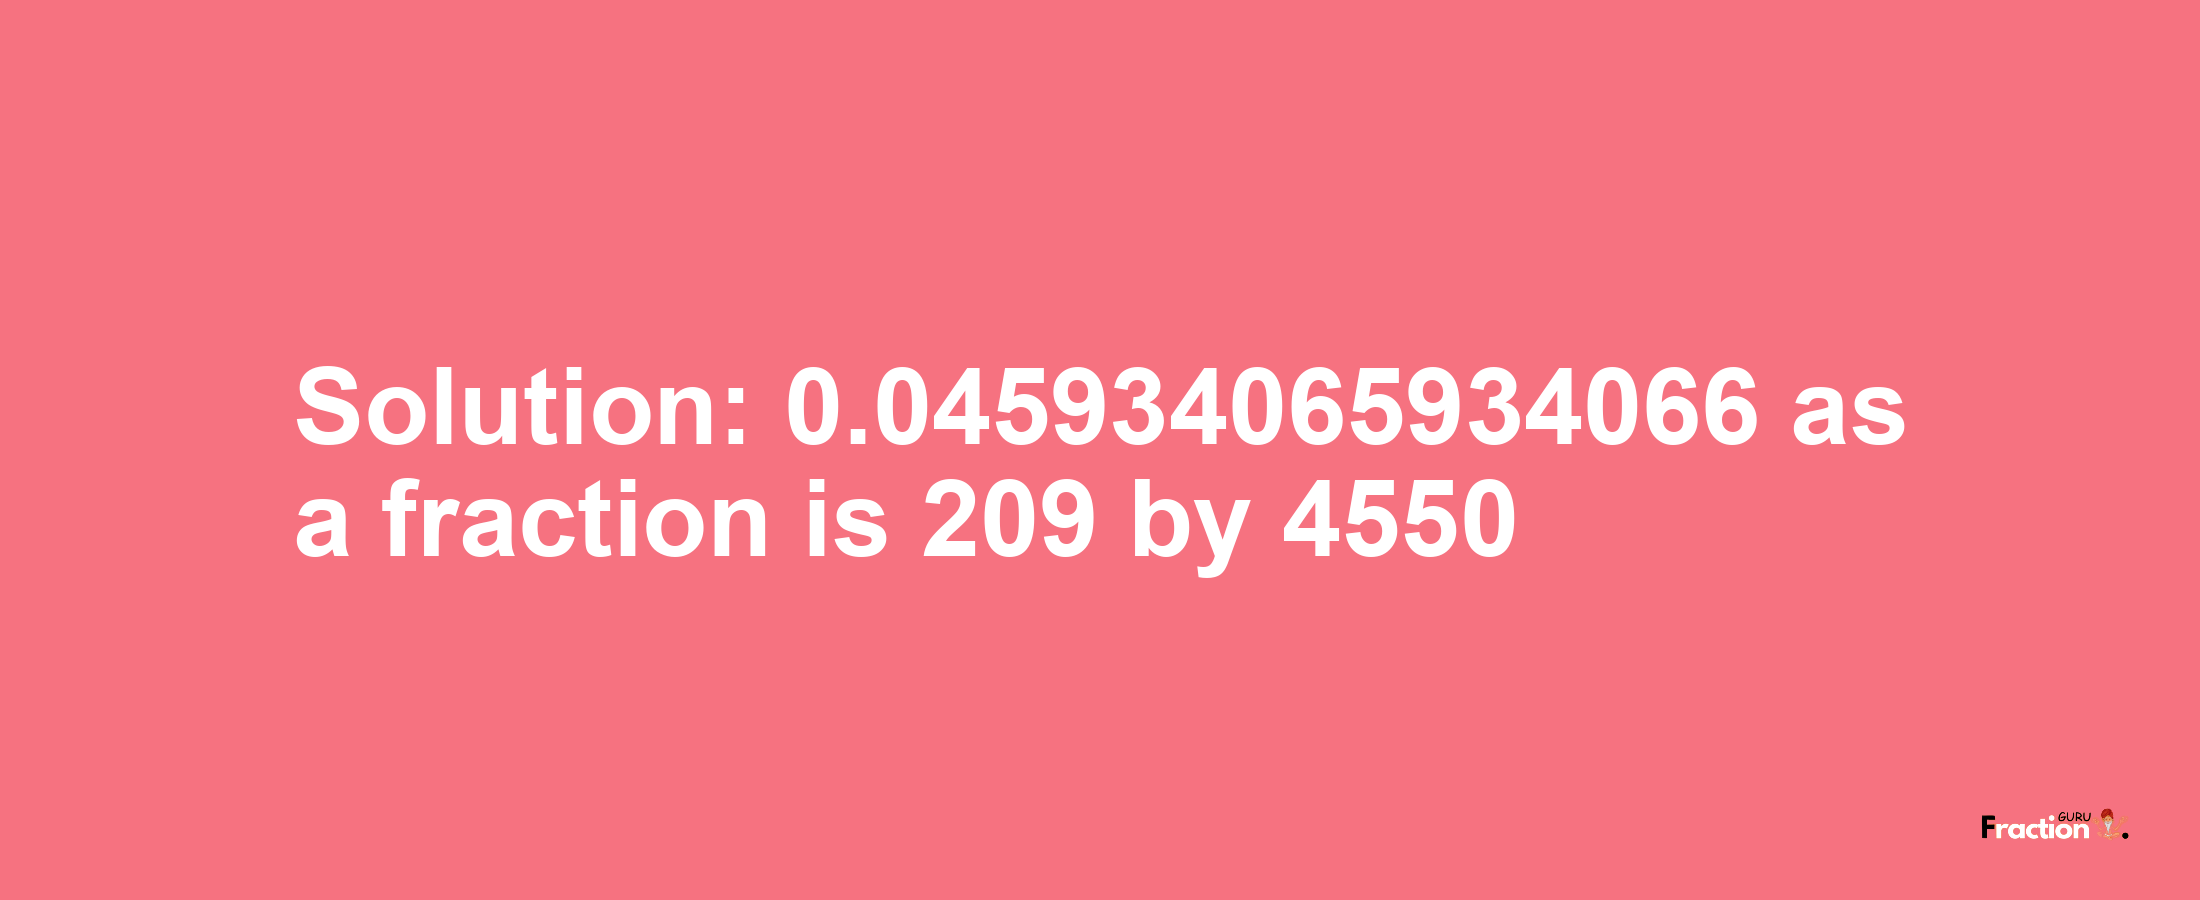 Solution:0.045934065934066 as a fraction is 209/4550